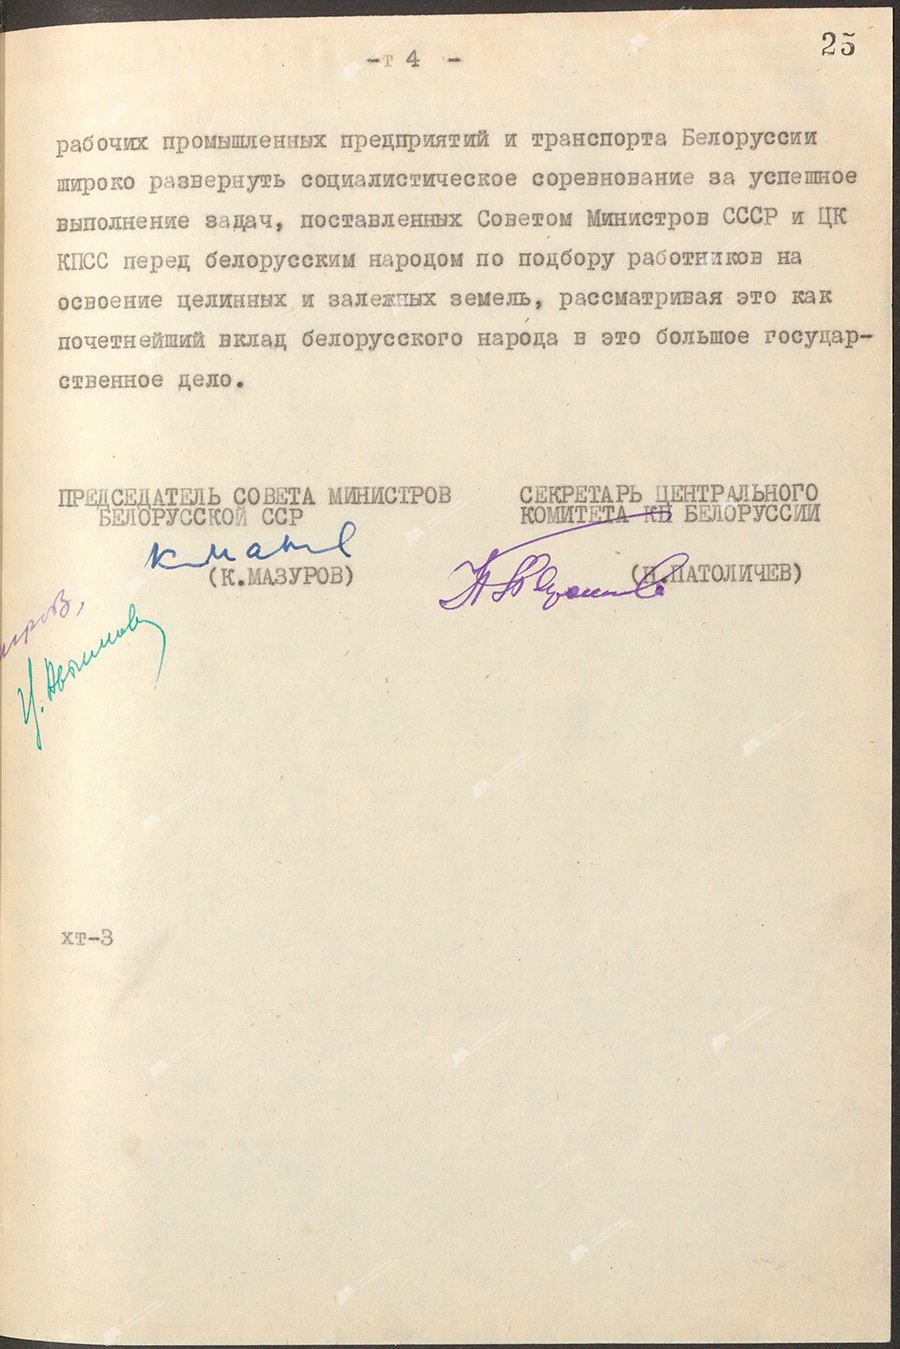 Resolution No. 5 of the Council of Ministers of the BSSR and the Central Committee of the Communist Party of Belarus «On the selection and assignment of workers, engineering and technical workers and employees to work in MTS and state farms in the areas of development of virgin and fallow lands of the RSFSR and Kazakhstan»-стр. 3